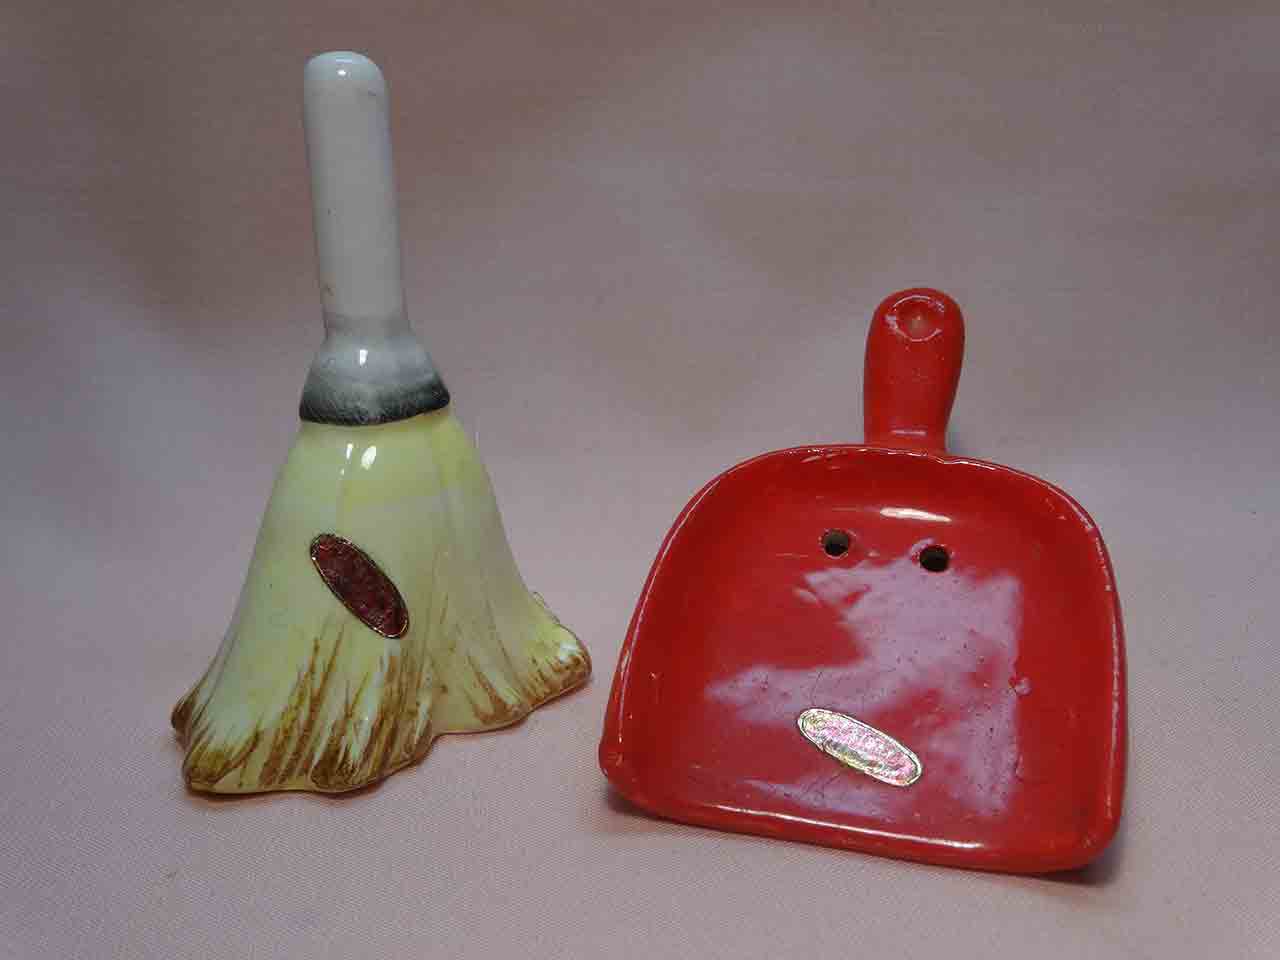 Enesco Seven Days of the Week salt and pepper shakers series - Friday cleaning day - straw broom and dustpan